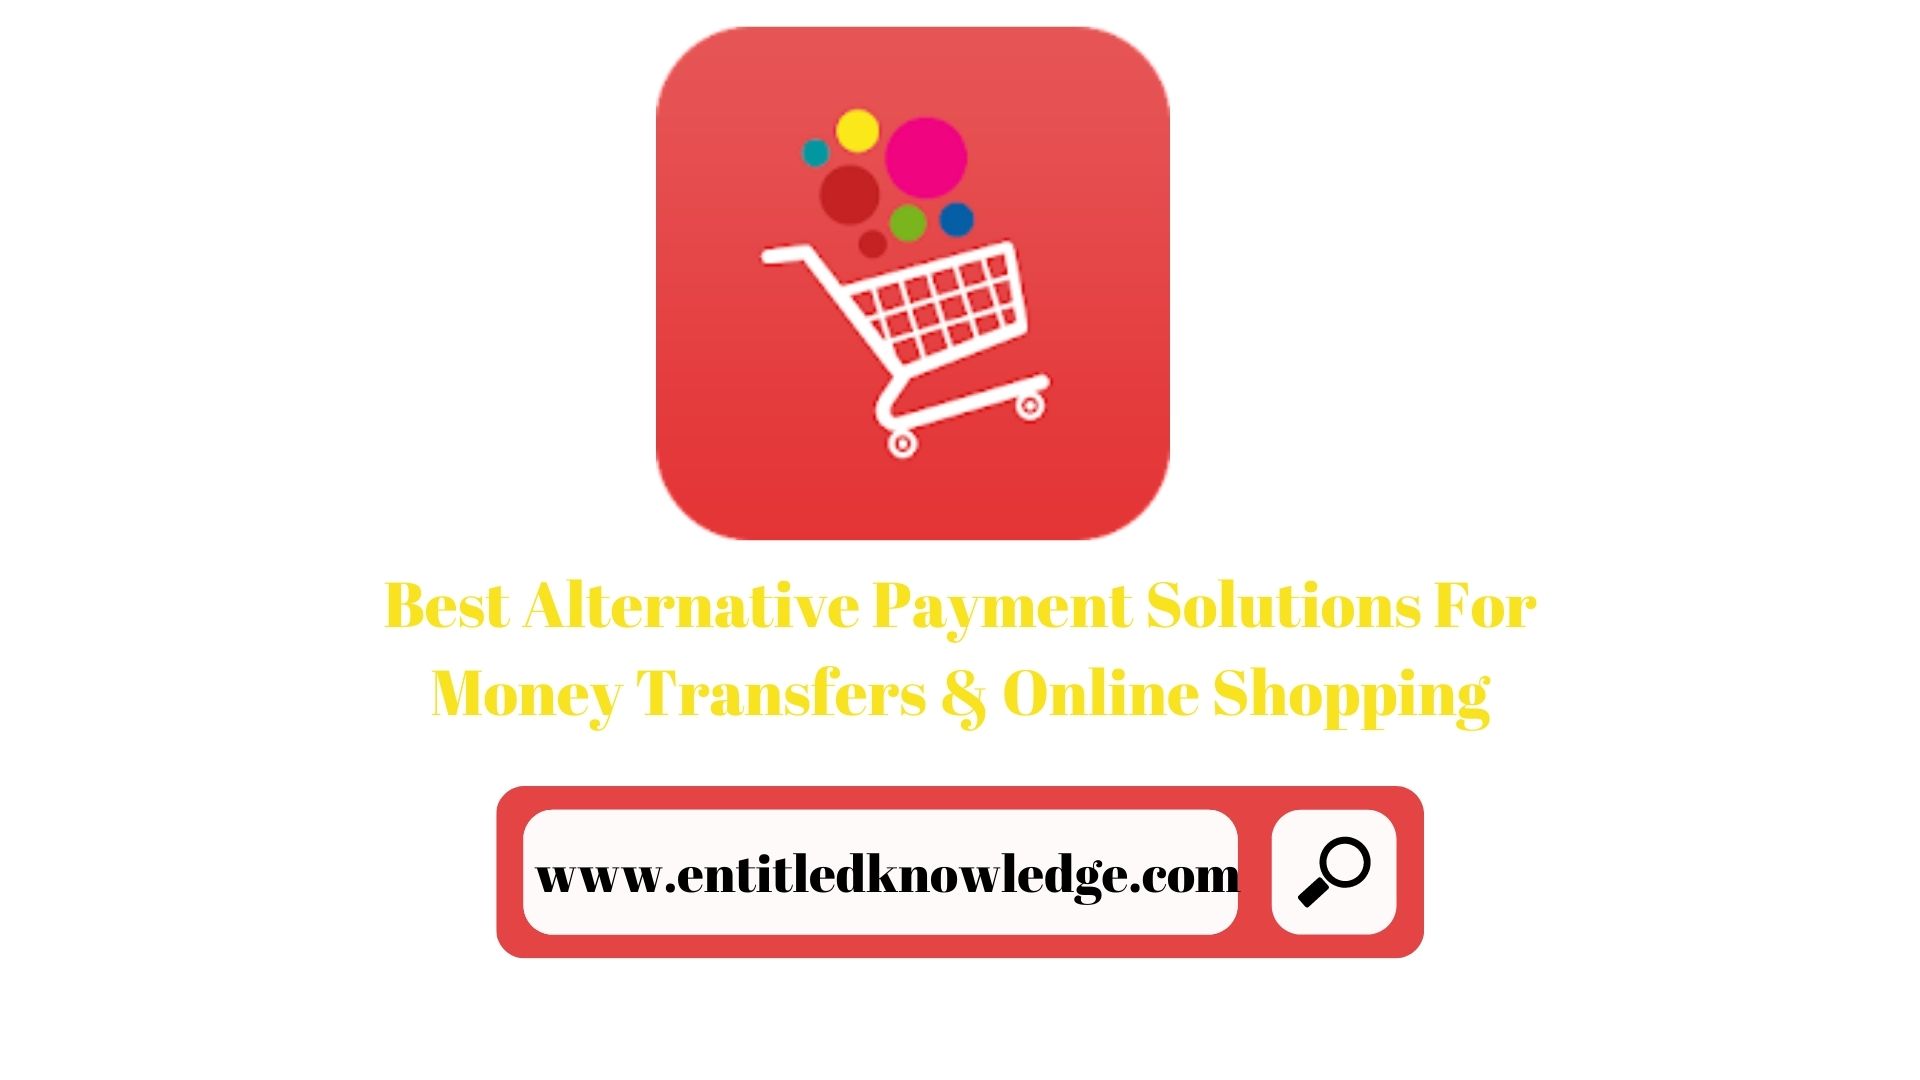 Best Alternative Payment Solutions For Money Transfers & Online Shopping